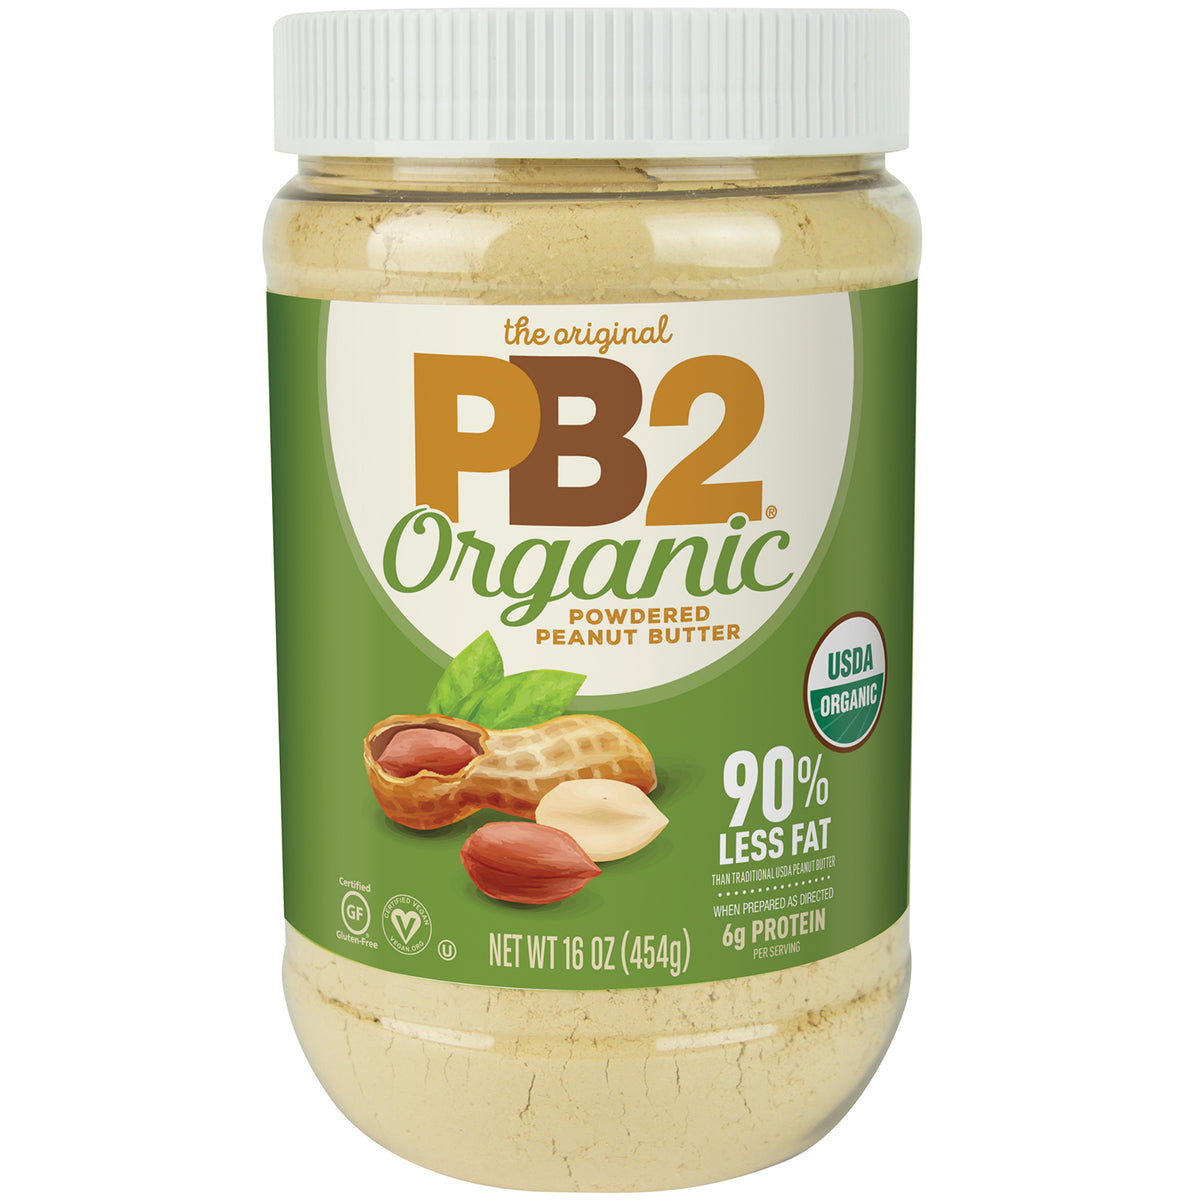 PB2 Foods The Original PB2, Powdered Peanut Butter with Cocoa, 16 oz (454 g)